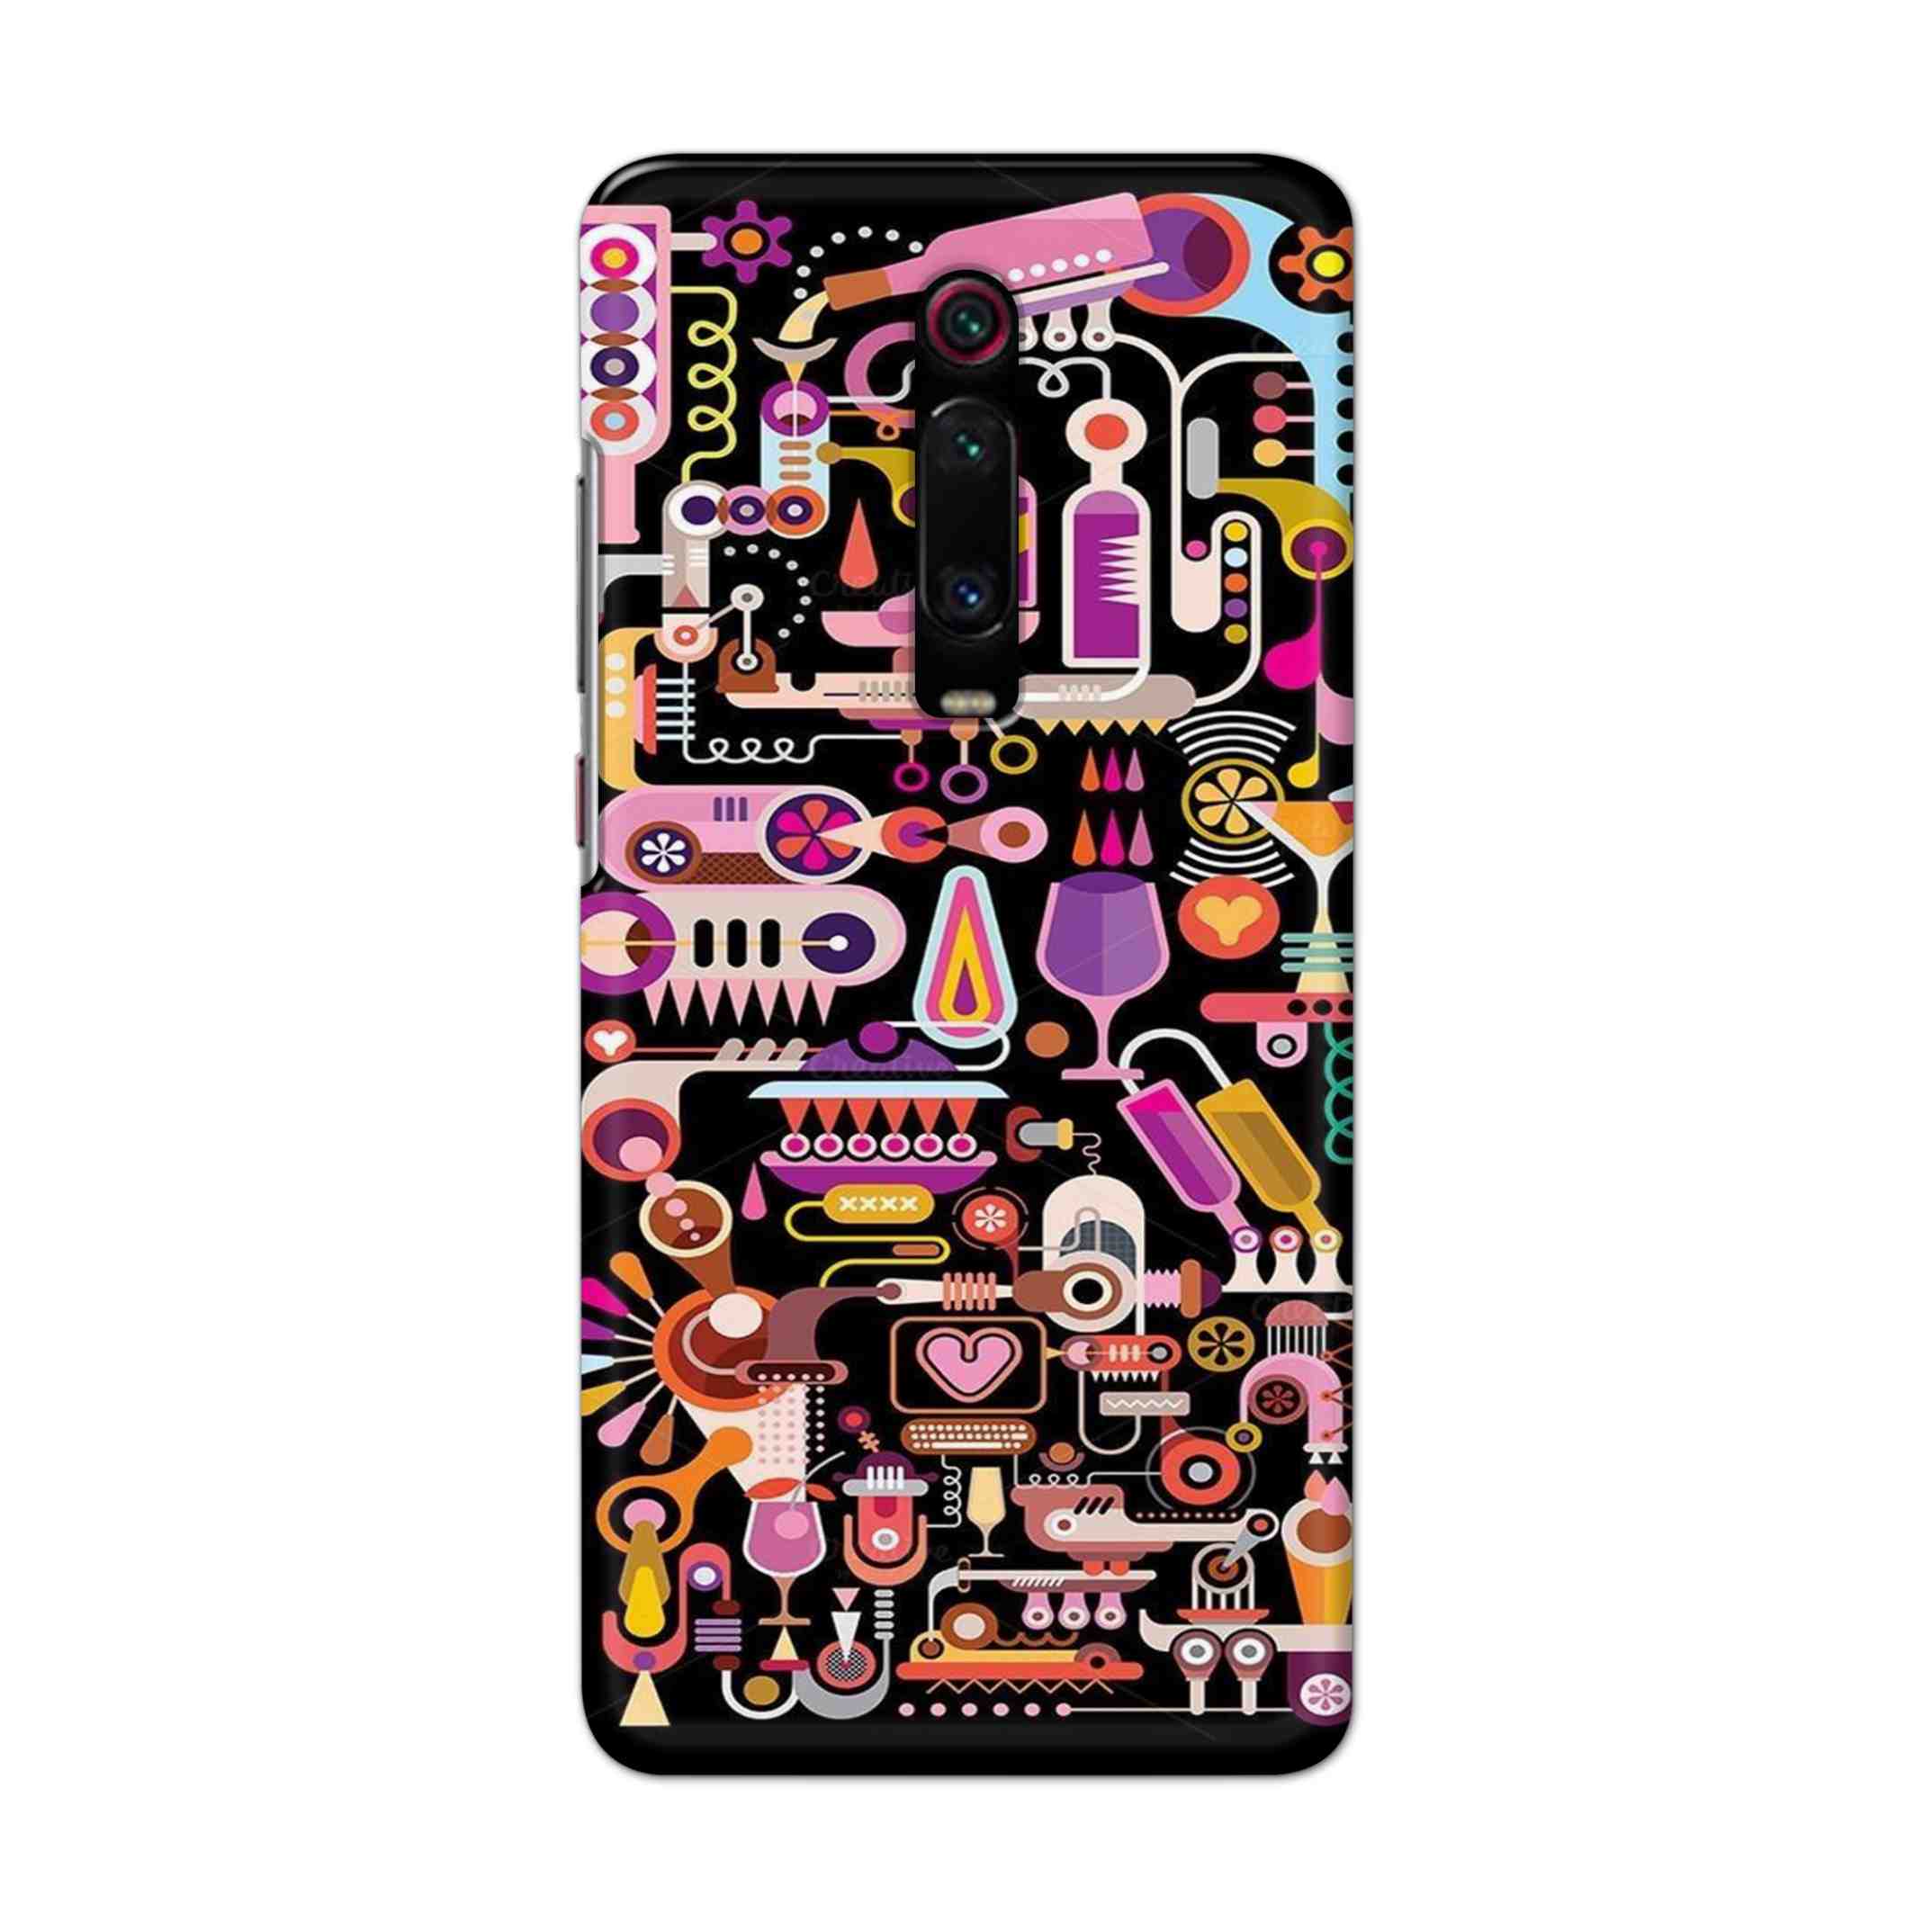 Buy Lab Art Hard Back Mobile Phone Case Cover For Xiaomi Redmi K20 Online